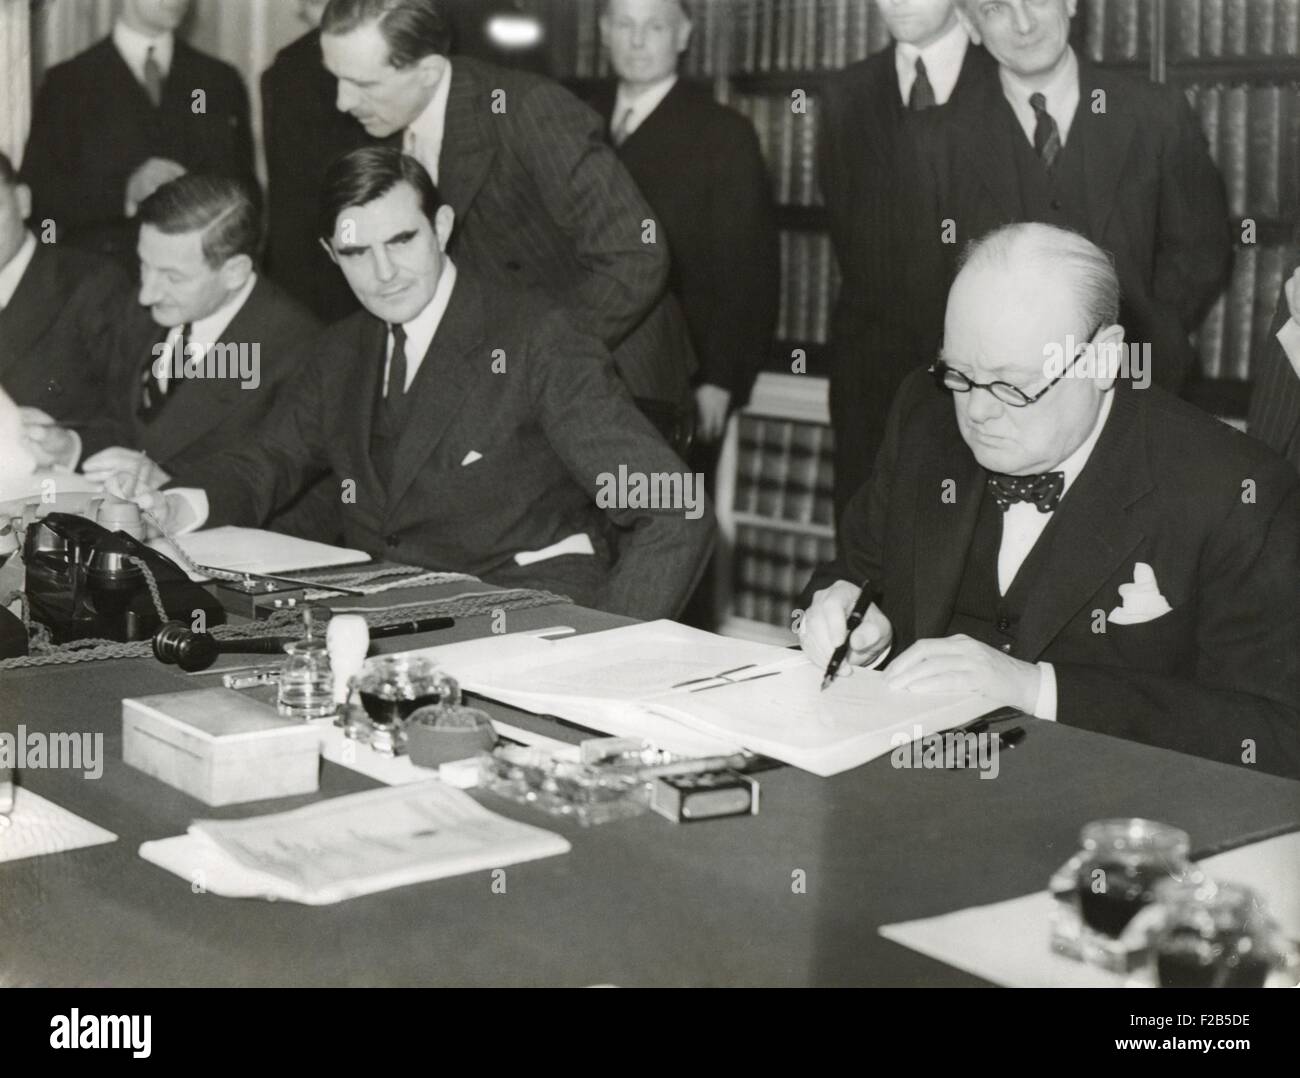 Winston Churchill signing the 'Lend Lease' agreement to lease British bases to the U.S. March 11, 1941. From his desk at 10 Downing Street, Churchill and U.S. Ambassador, John G. Winant, sign ‘An Act to Further Promote the Defense of the United States'. - (BSLOC 2014 17 35) Stock Photo